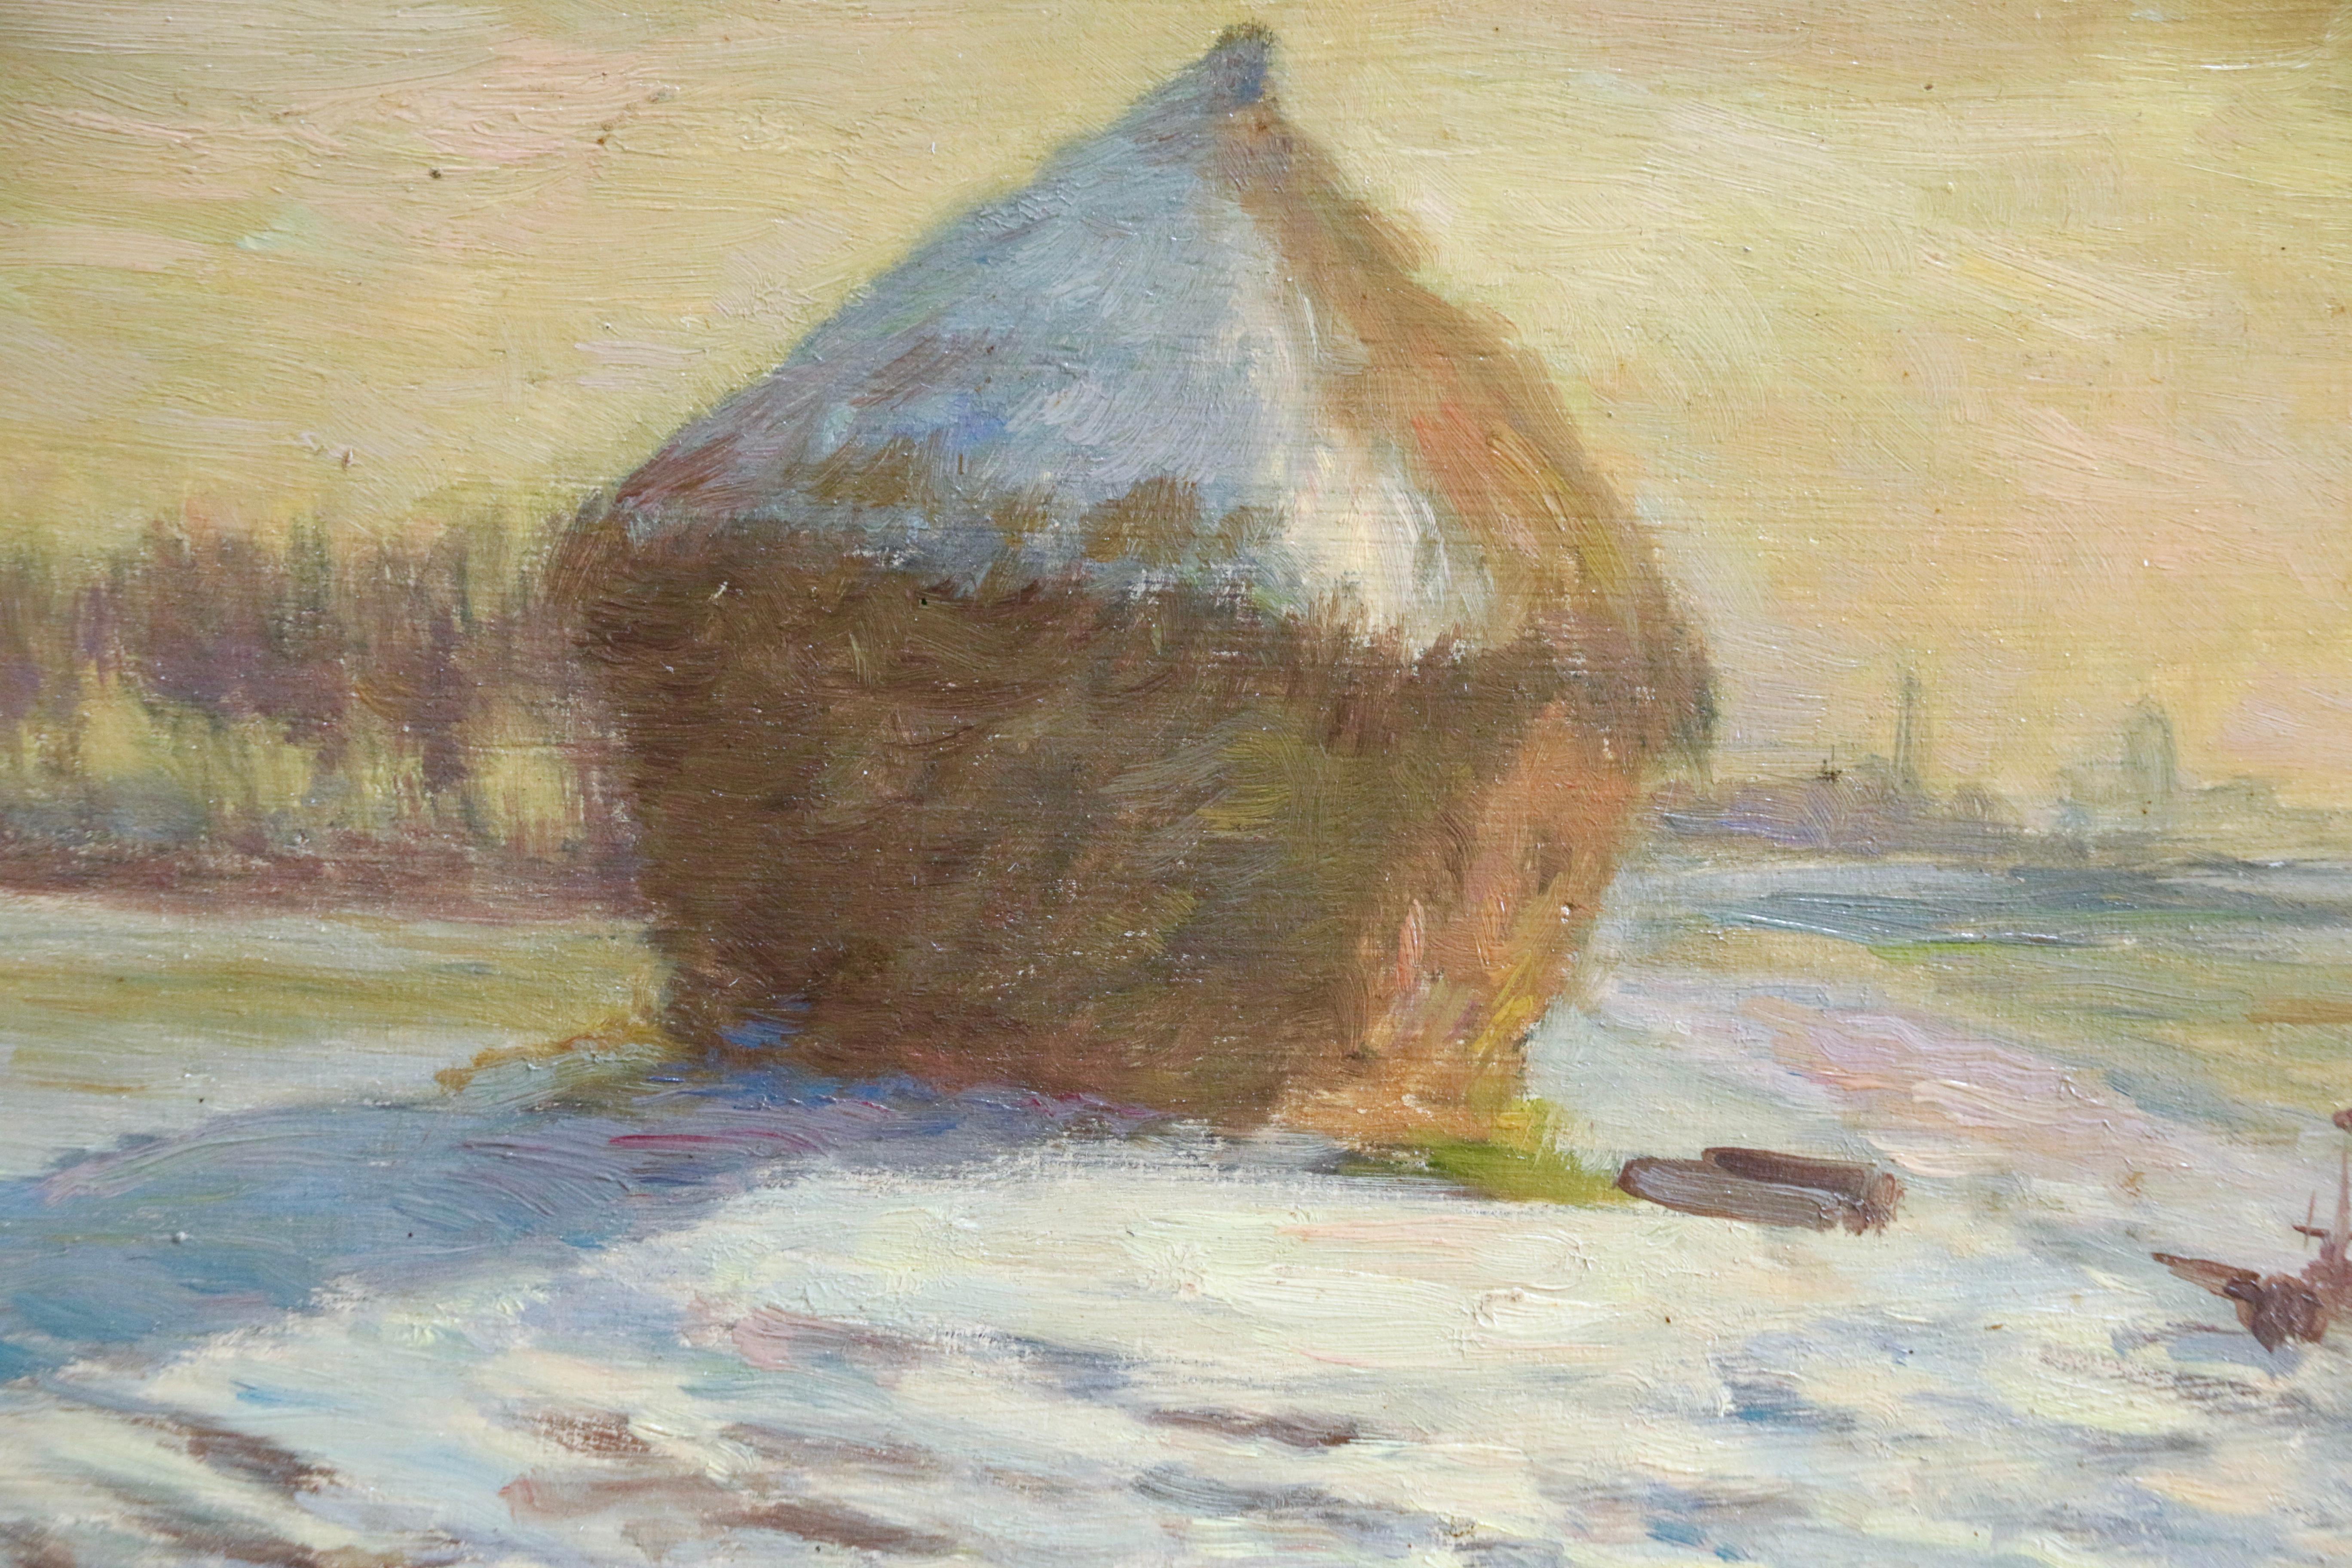 Haystacks - Snow - January 1902 - 19th Century Oil, Winter Landscape by H Duhem  - Painting by Henri Duhem